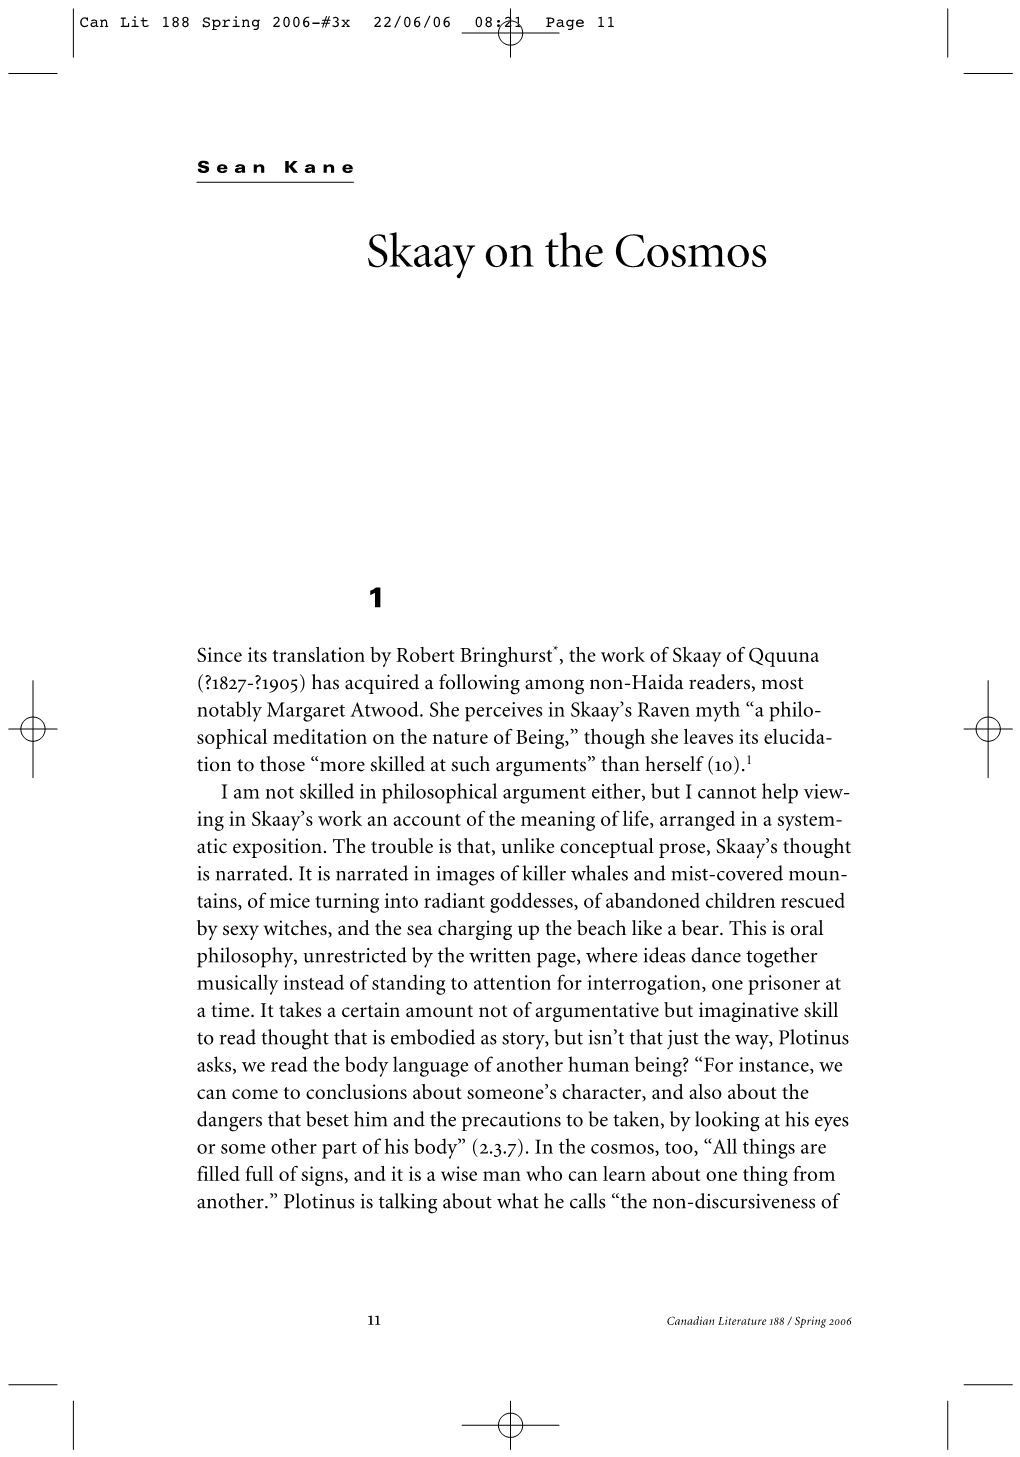 Skaay on the Cosmos